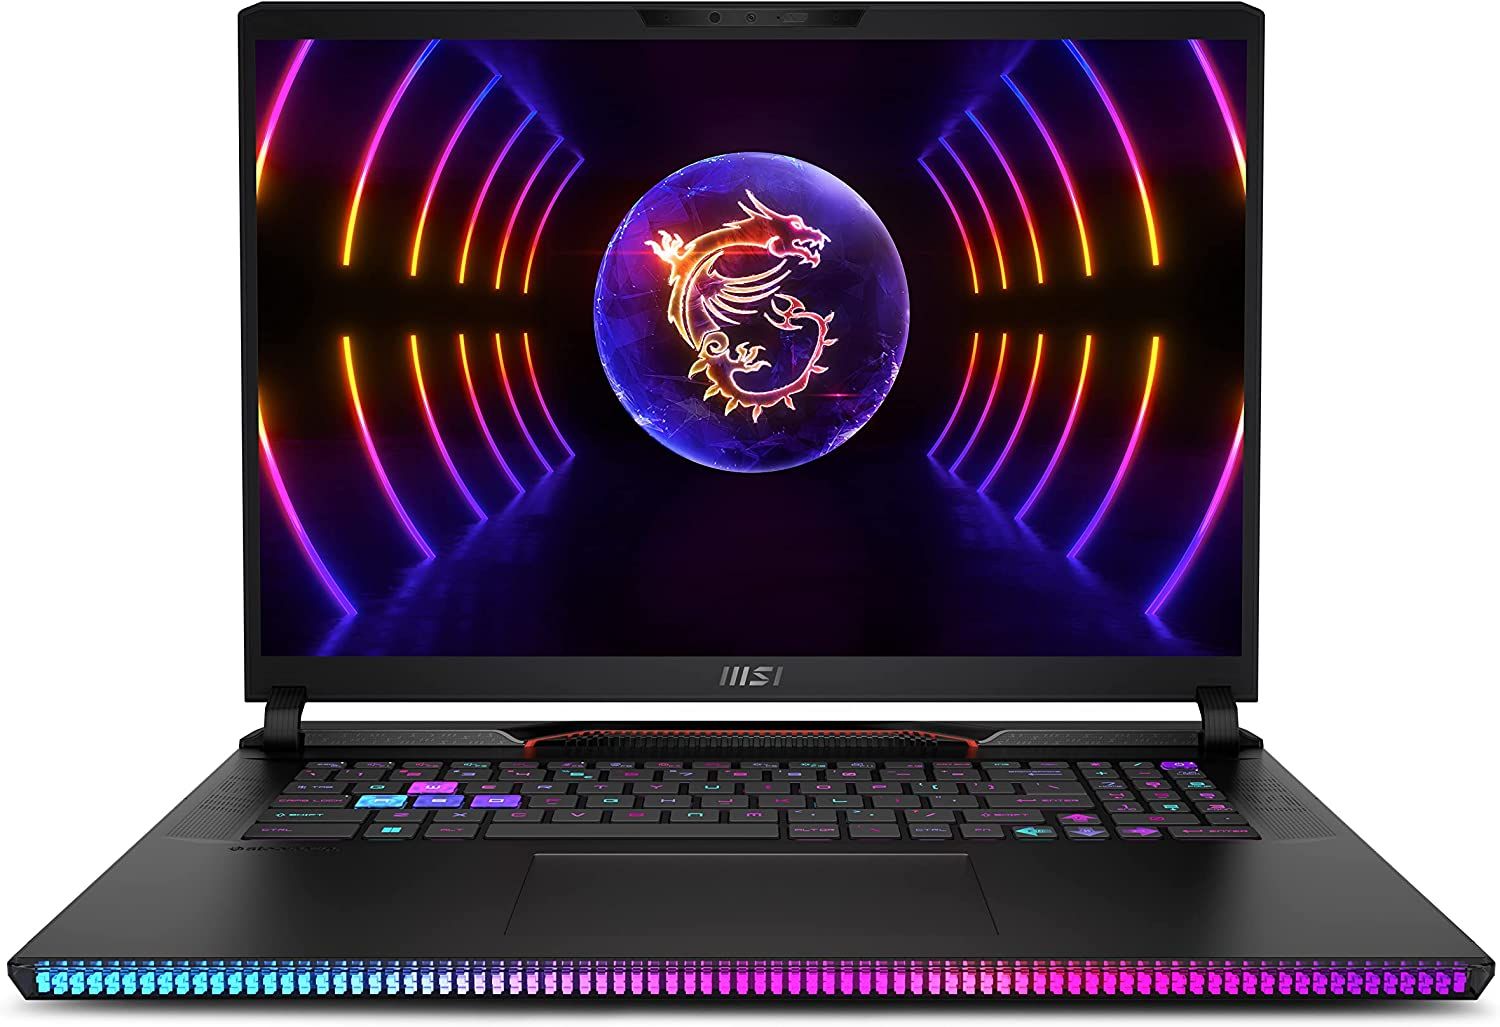 The best gaming laptop 2024 - all the latest models compared